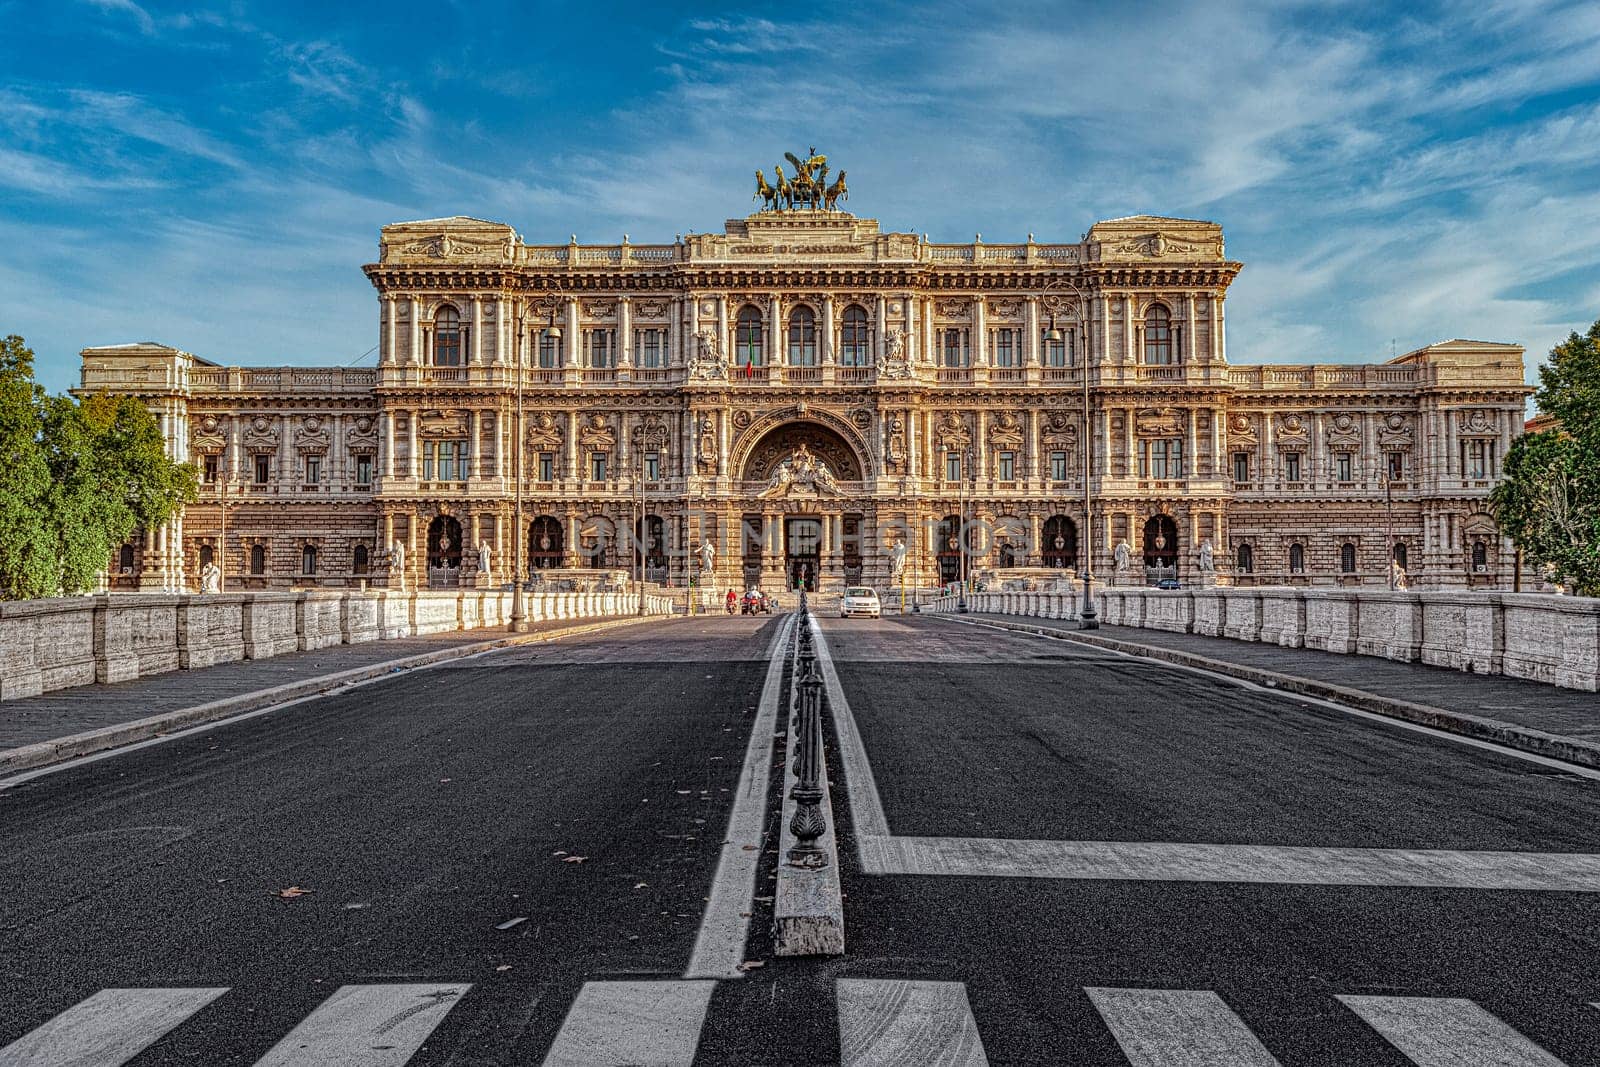 The Supreme Court of Cassation is the highest court of appeal or court of last resort in Italy. It has its seat in the Palace of Justice, Rome.